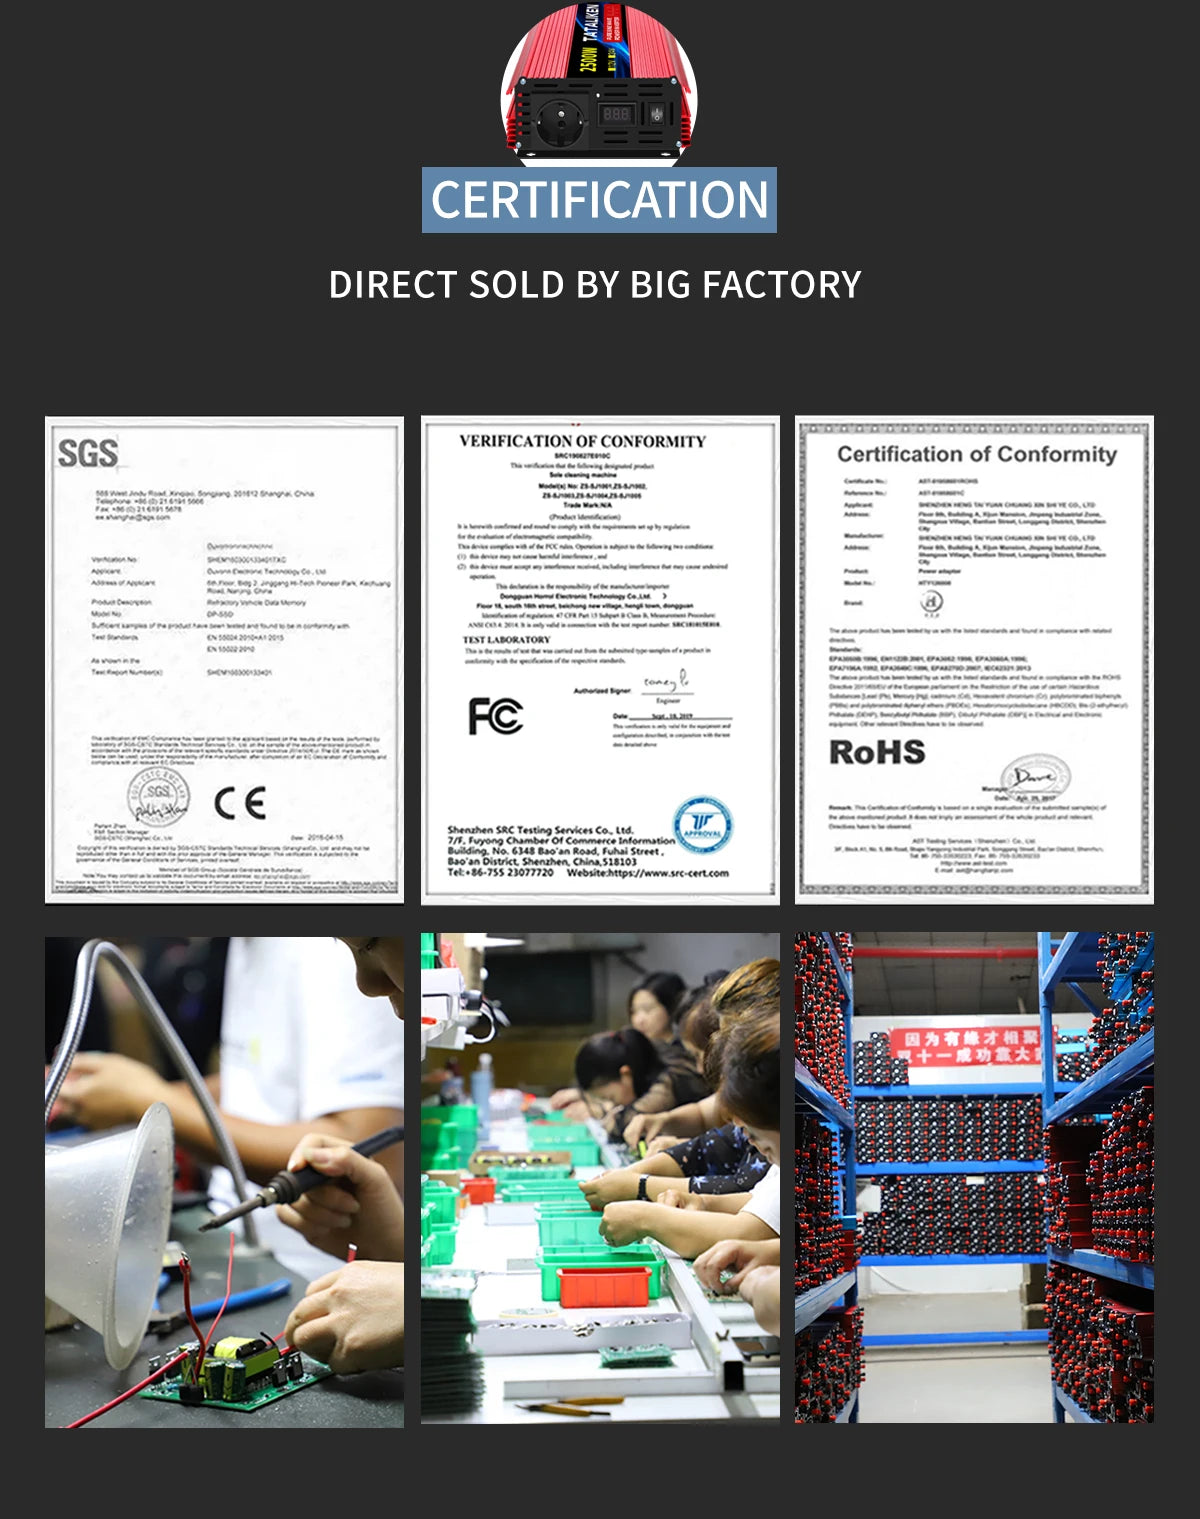 Inverter, SGS-certified product meets EU safety and environmental standards (RoHS) and Chinese national standards.